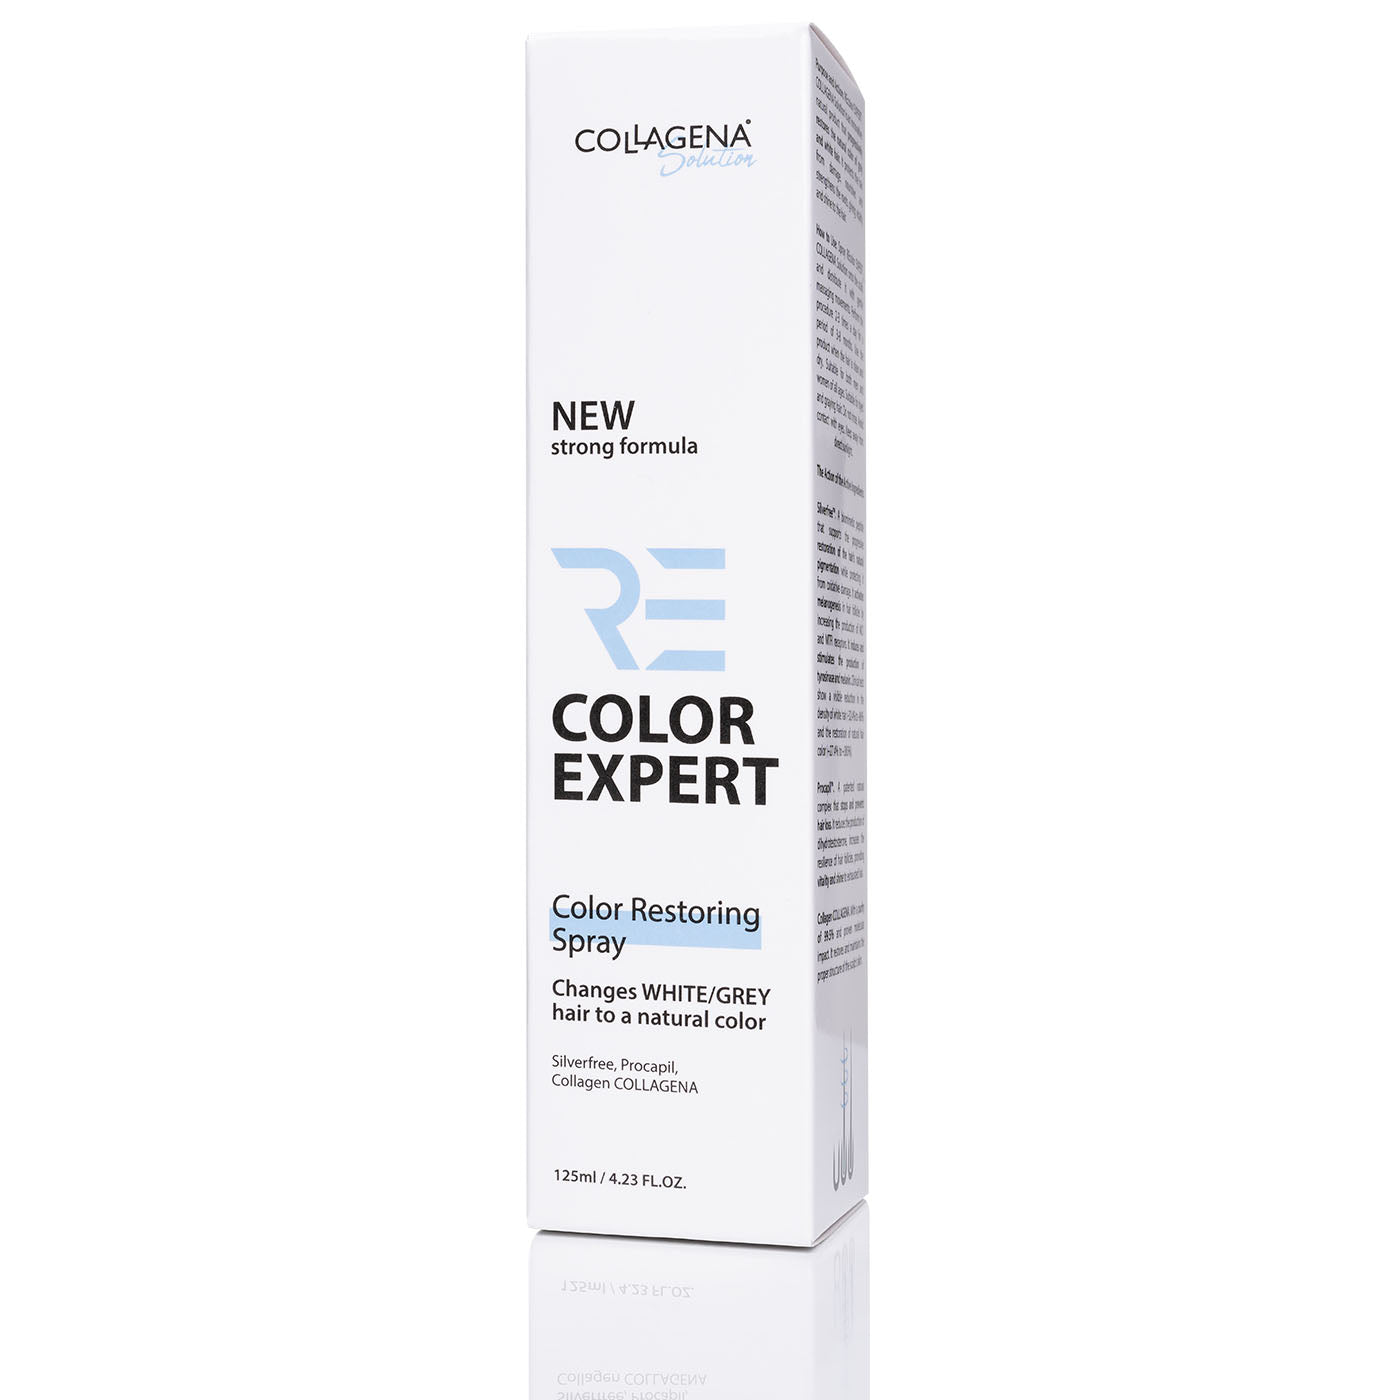 REcolor EXPERT NEW Strong Formula spray for restoring the natural color of gray hair, COLLAGENA Solution, 125 ml.